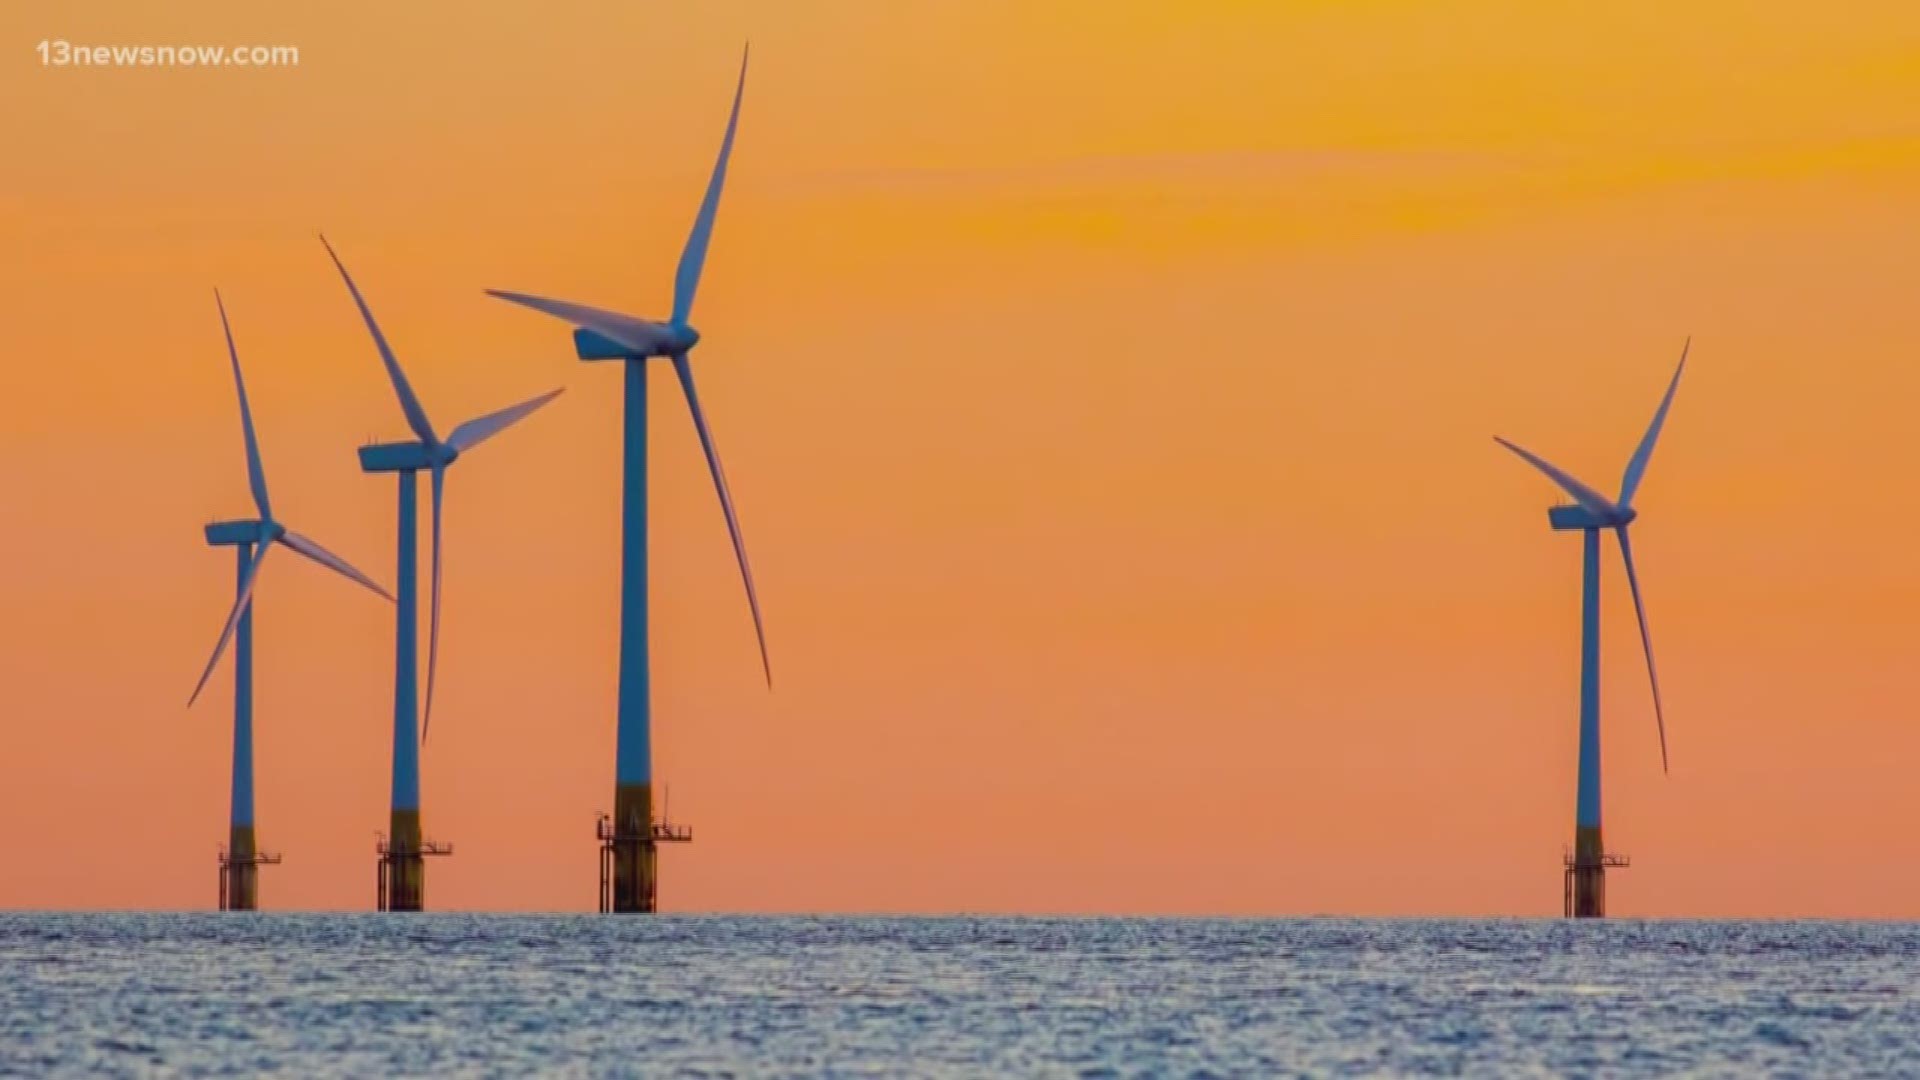 Dominion Energy is seeking regulatory approval to build about 220 wind turbines in federal waters it has already leased 27 miles off Virginia Beach.